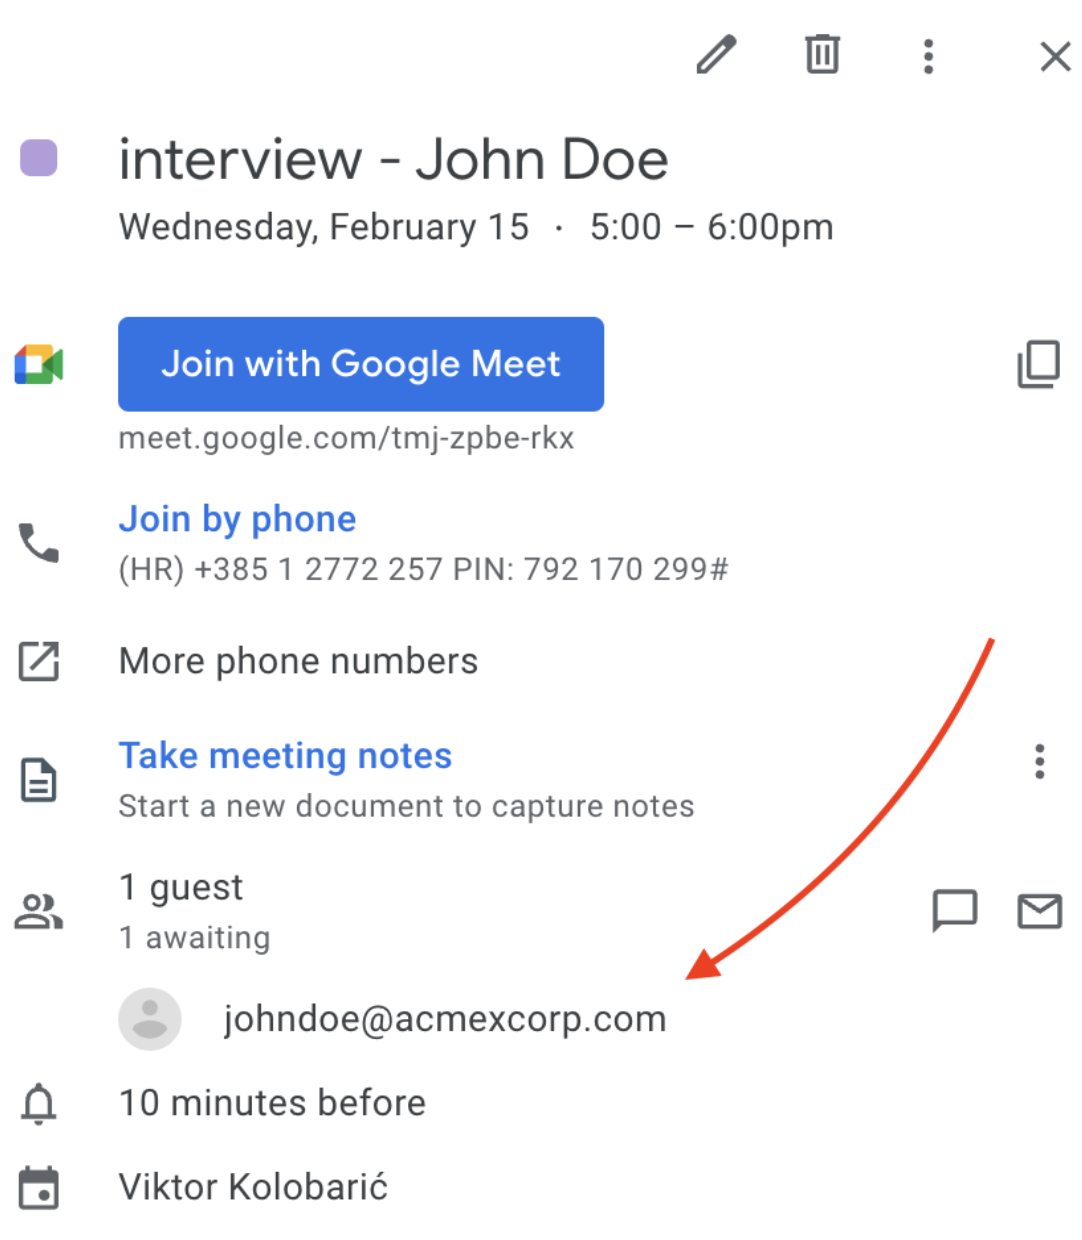 Arrow pointing to email address of Google calendar event for interview